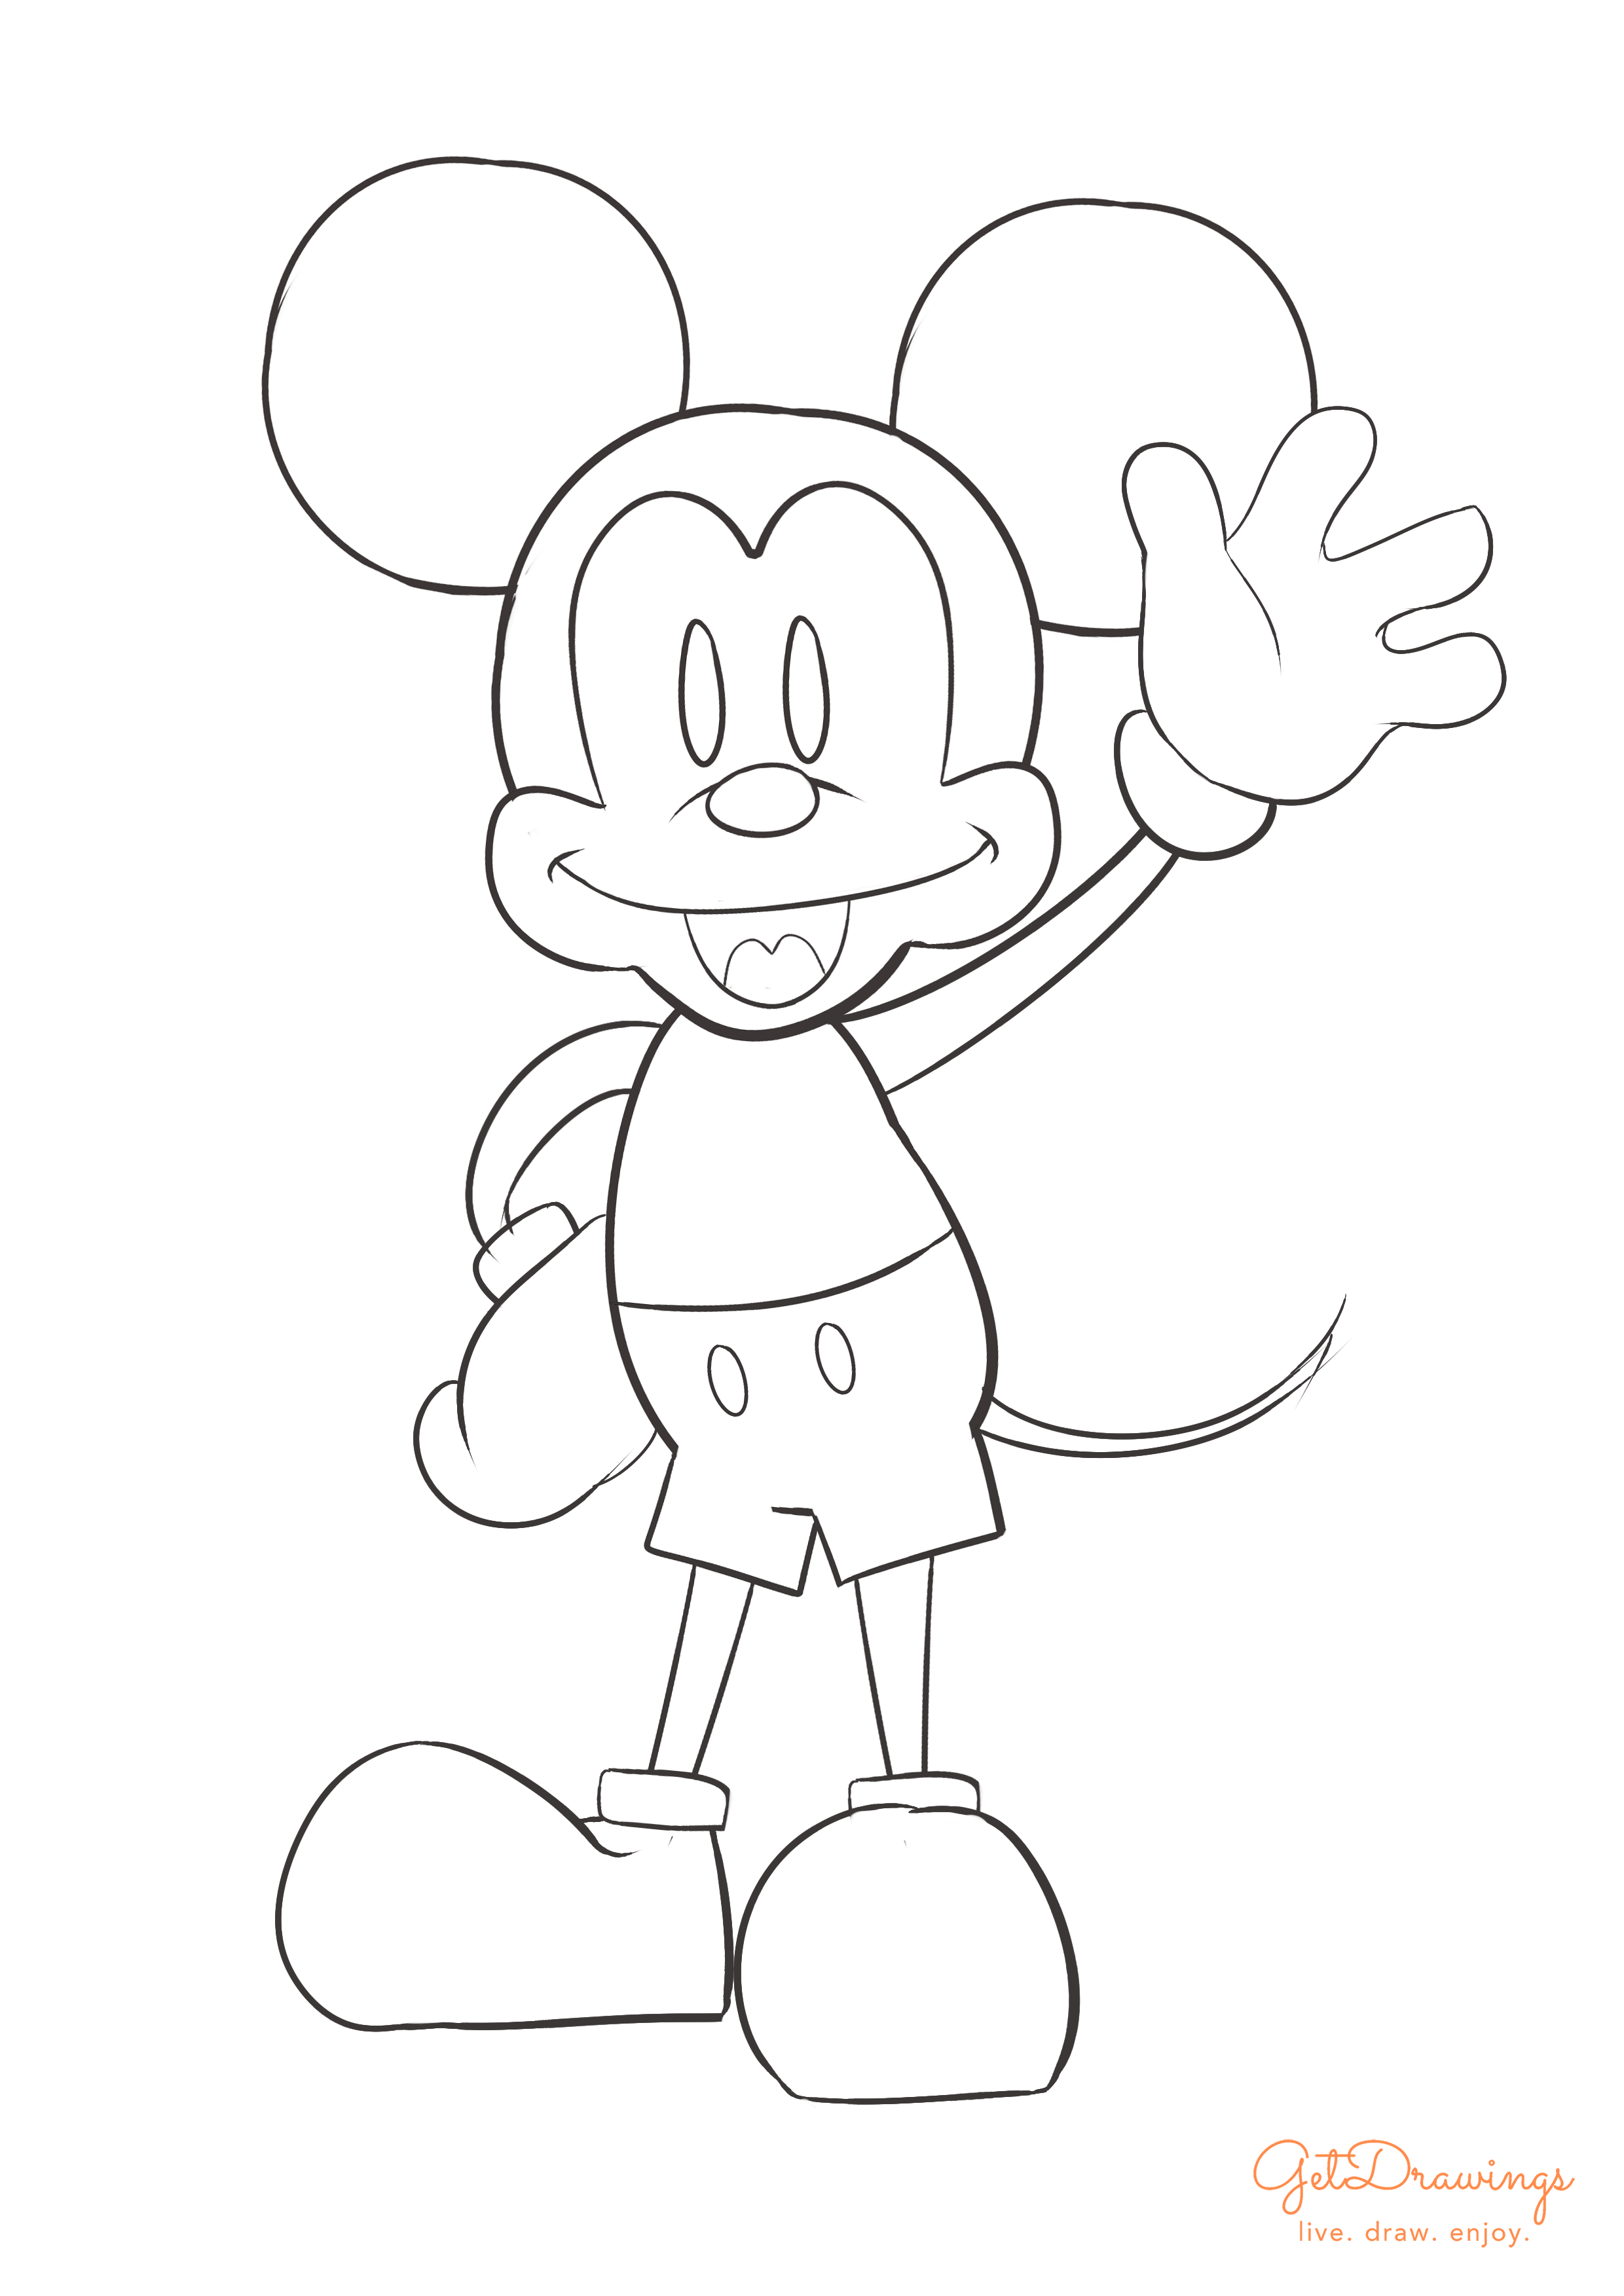 How to draw a Mickey Mouse?